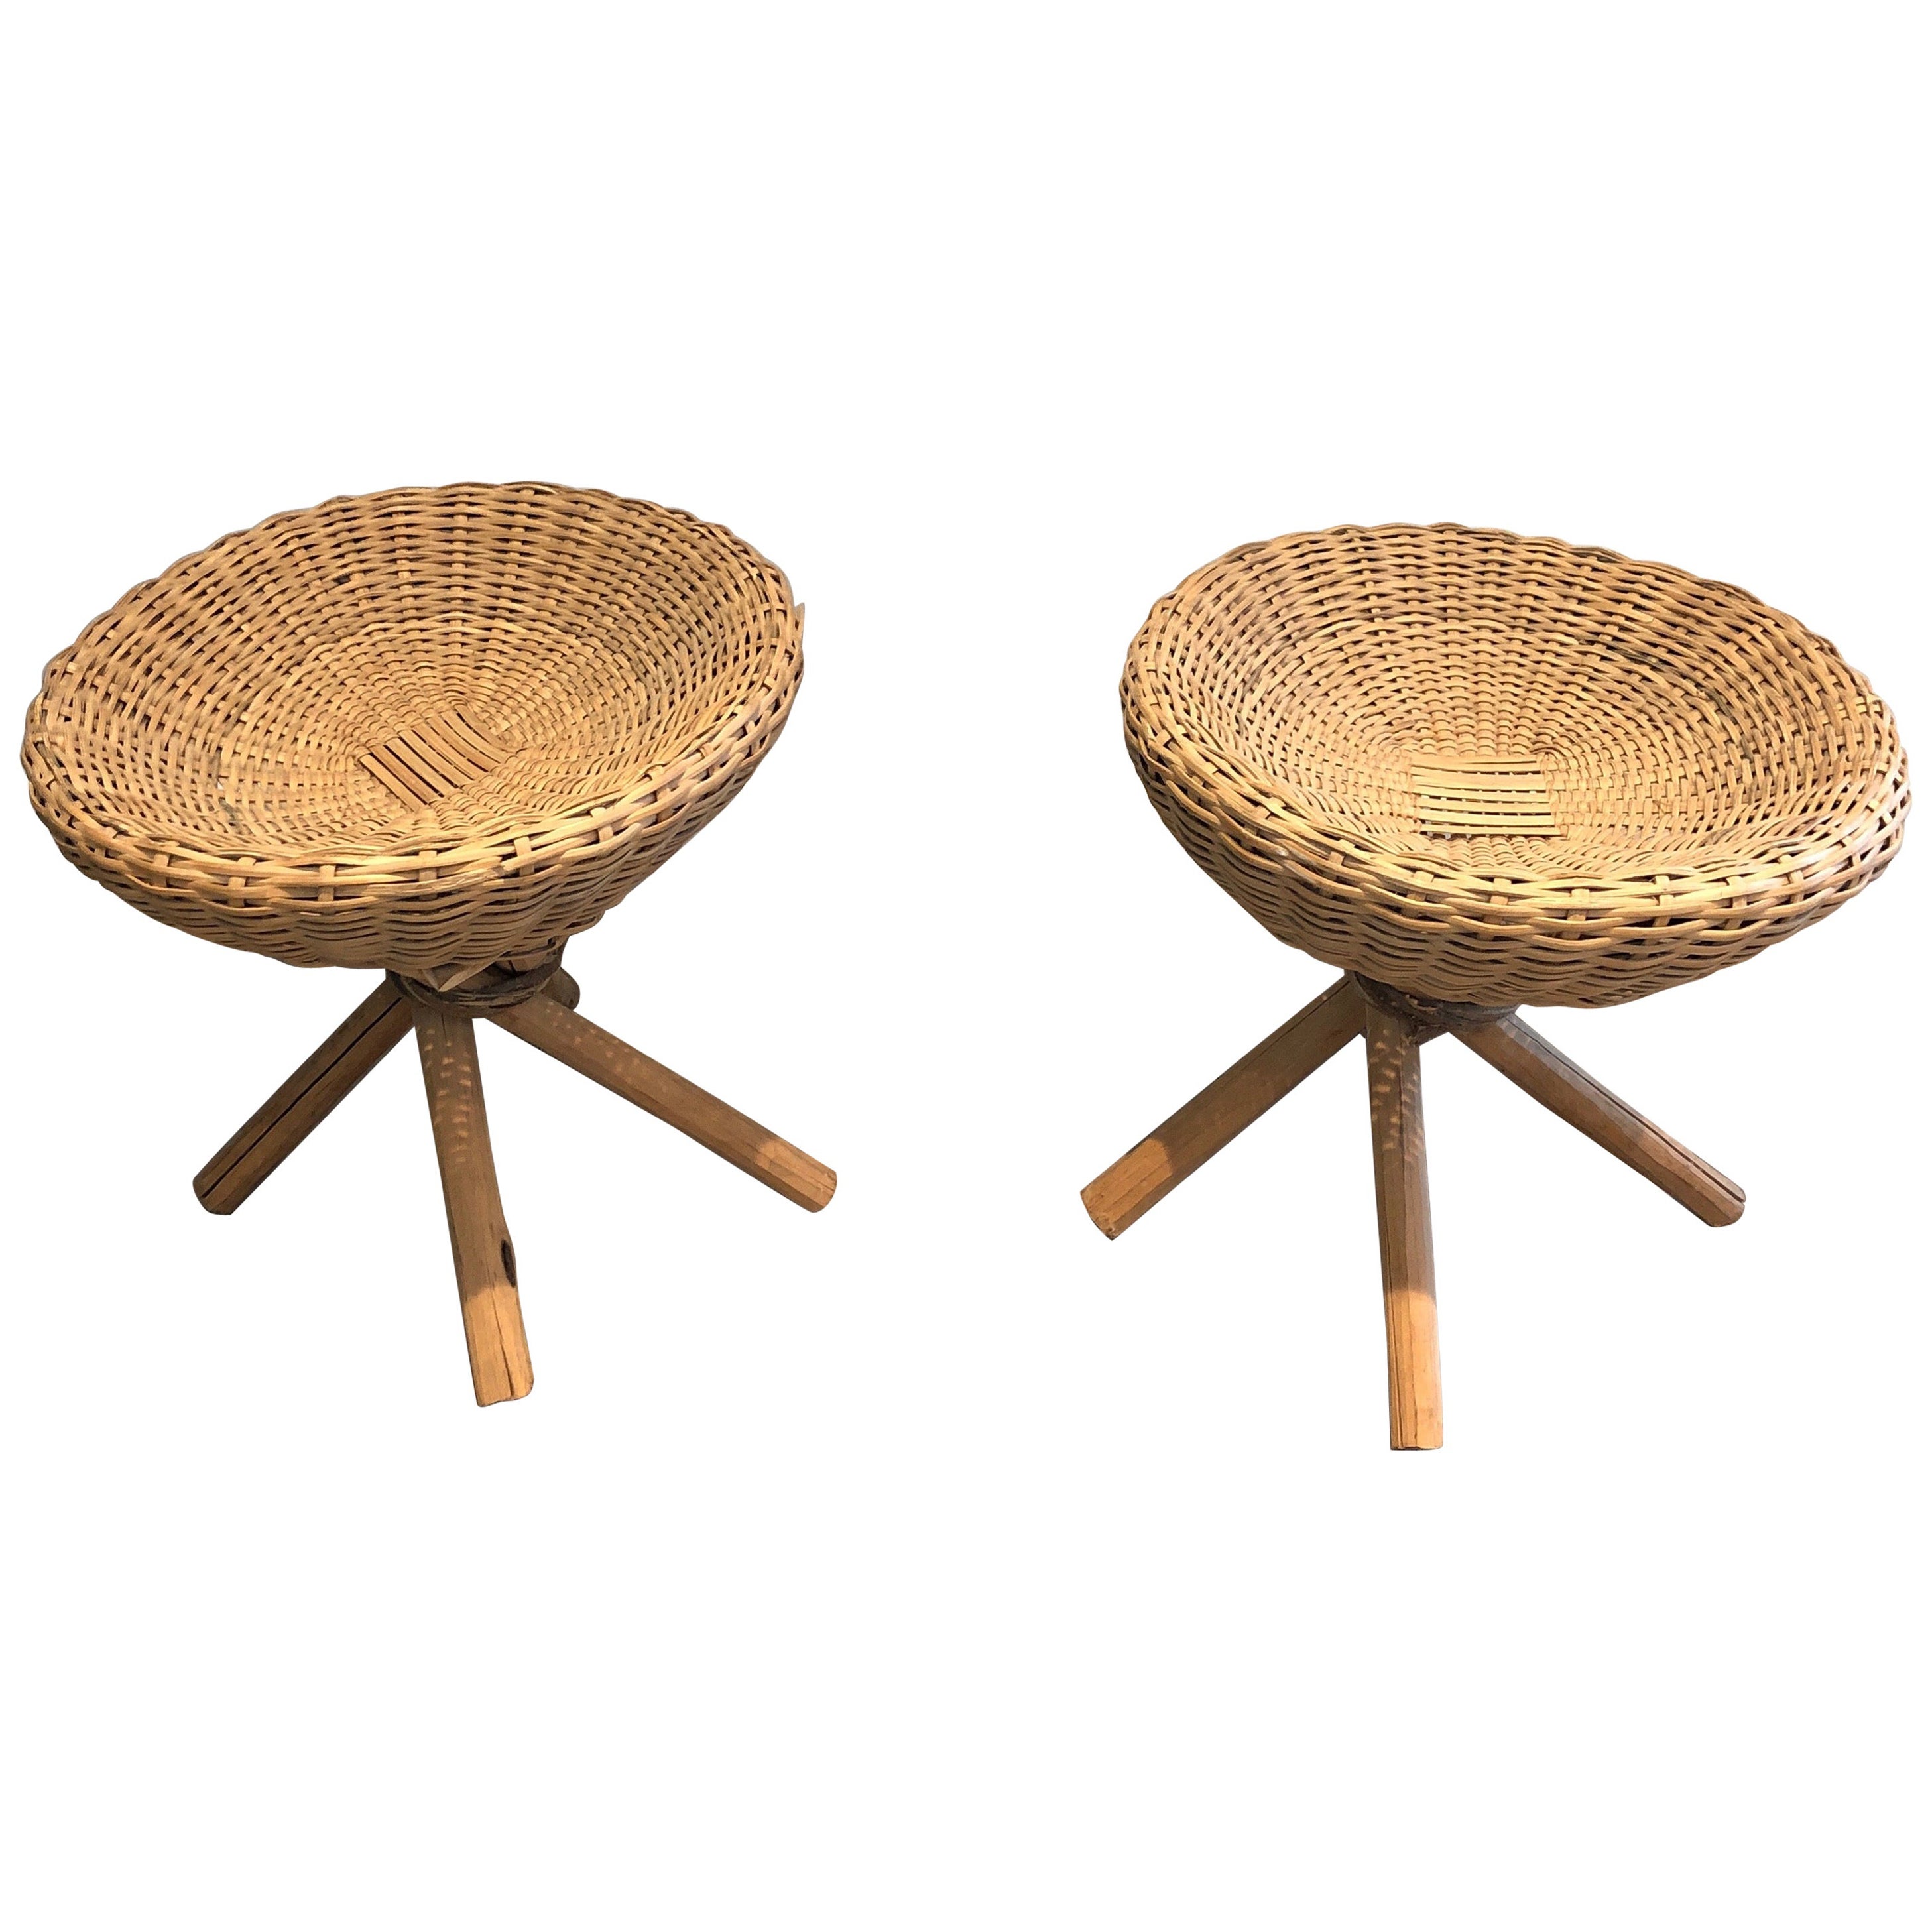 Pair of Wood and Rattan Stools, French, Circa 1970 For Sale